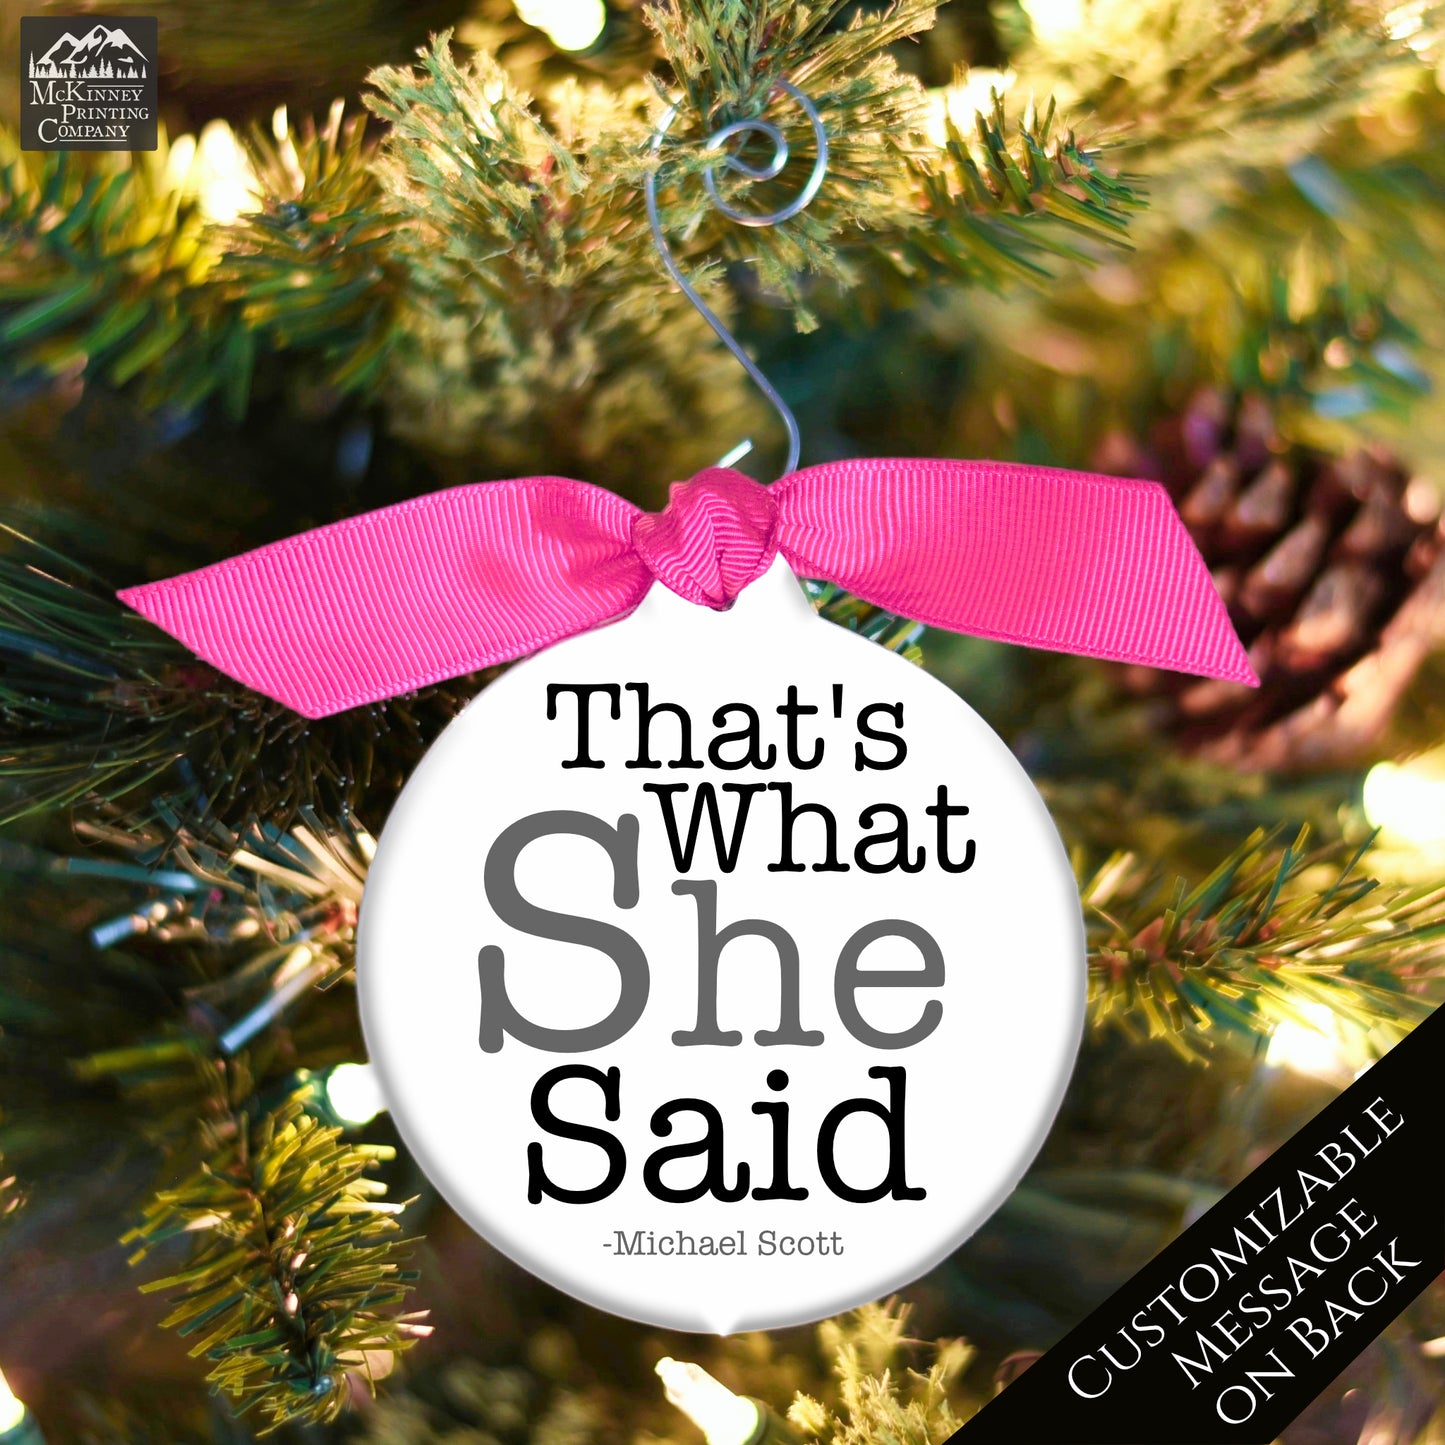 The Office TV Show - Christmas Ornament, That's What She Said, Quote